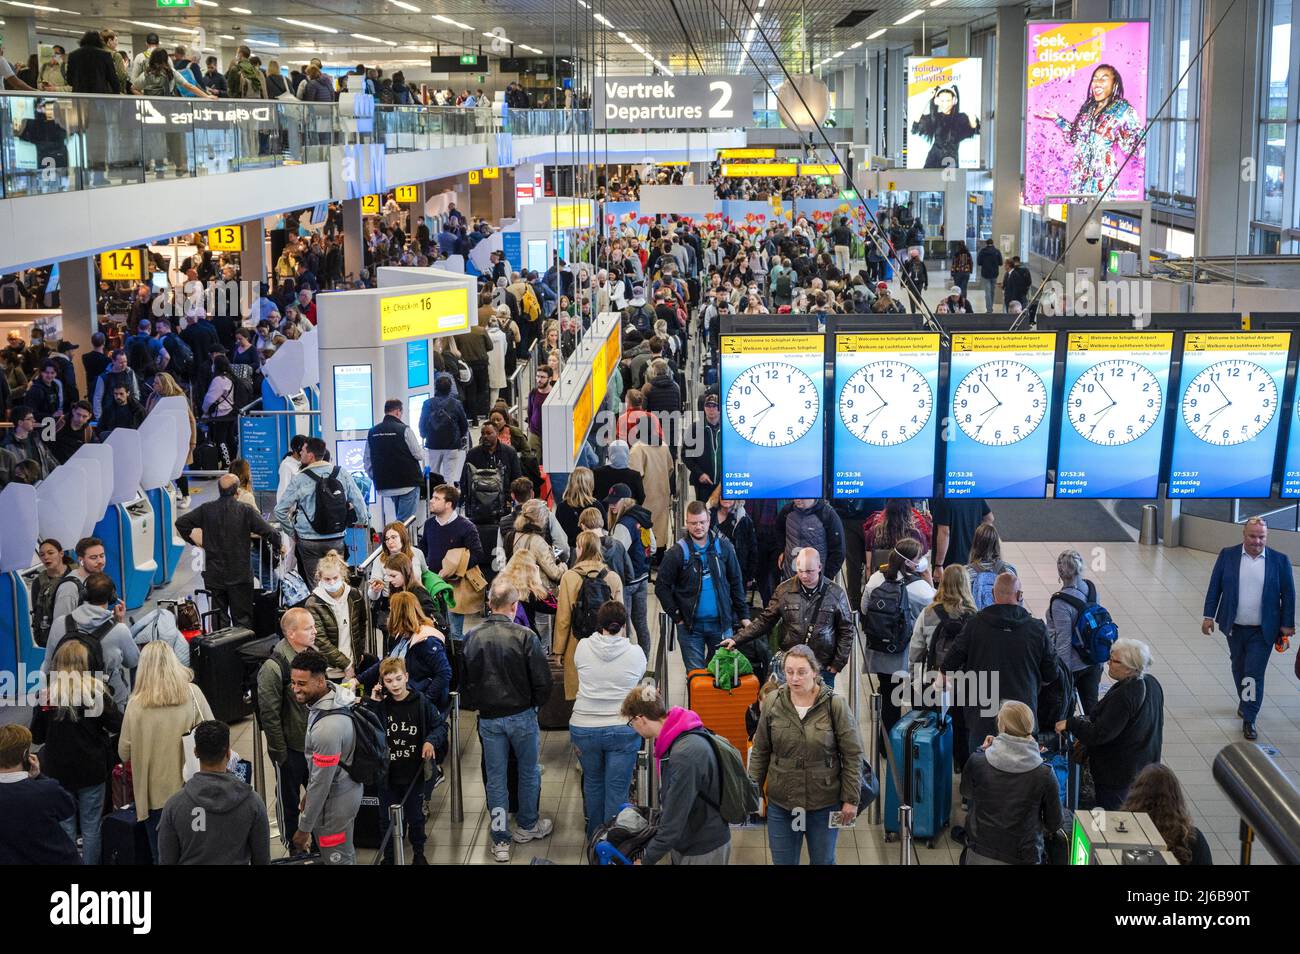 Schiphol, Netherlands. 30th Apr, 2022. 2022-04-30 06:56:43 SCHIPHOL - Schiphol Airport is very busy this weekend. The airport is facing serious staff shortages because there are hundreds of vacancies at the check-in desks, security and in the baggage basement that cannot be filled. ANP EVERT ELZINGA netherlands out - belgium out Credit: ANP/Alamy Live News Stock Photo